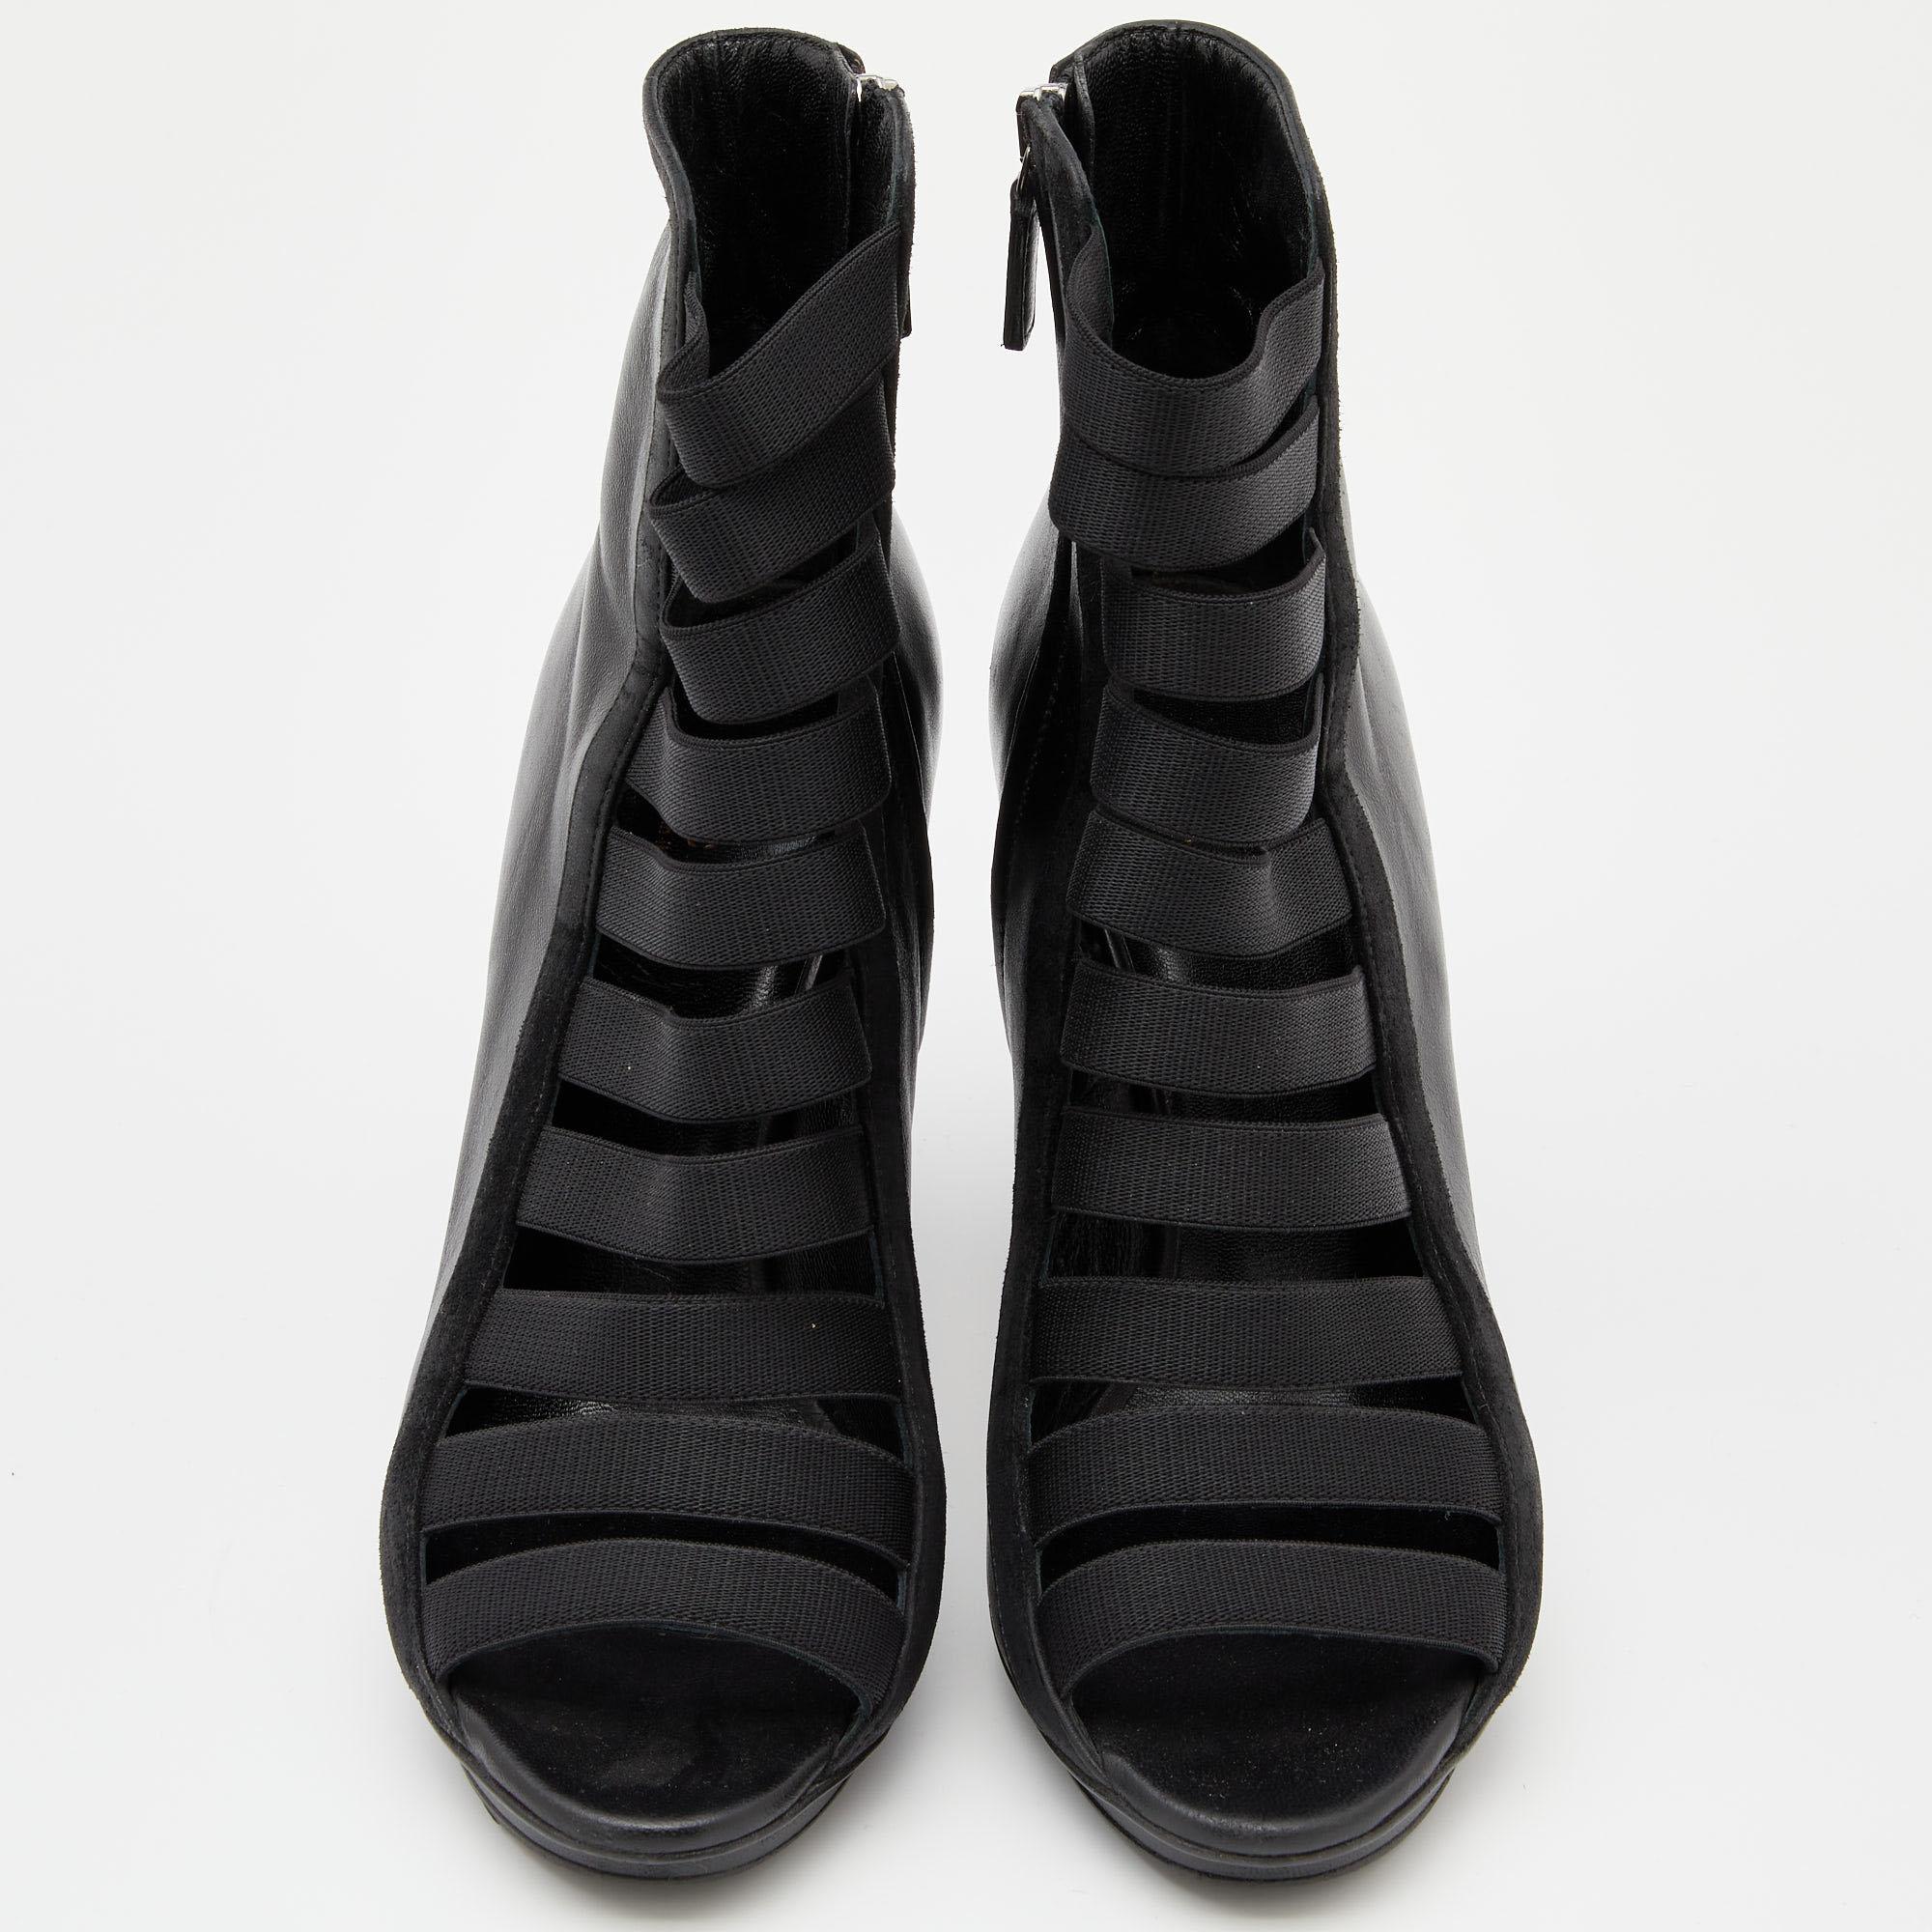 There is nothing edgier than these black gladiator booties from Gucci. They will definitely be your instant pick. They have a strappy design and side zipper openings make it easy to slip into them. Stylish pointed heels make them a great choice for